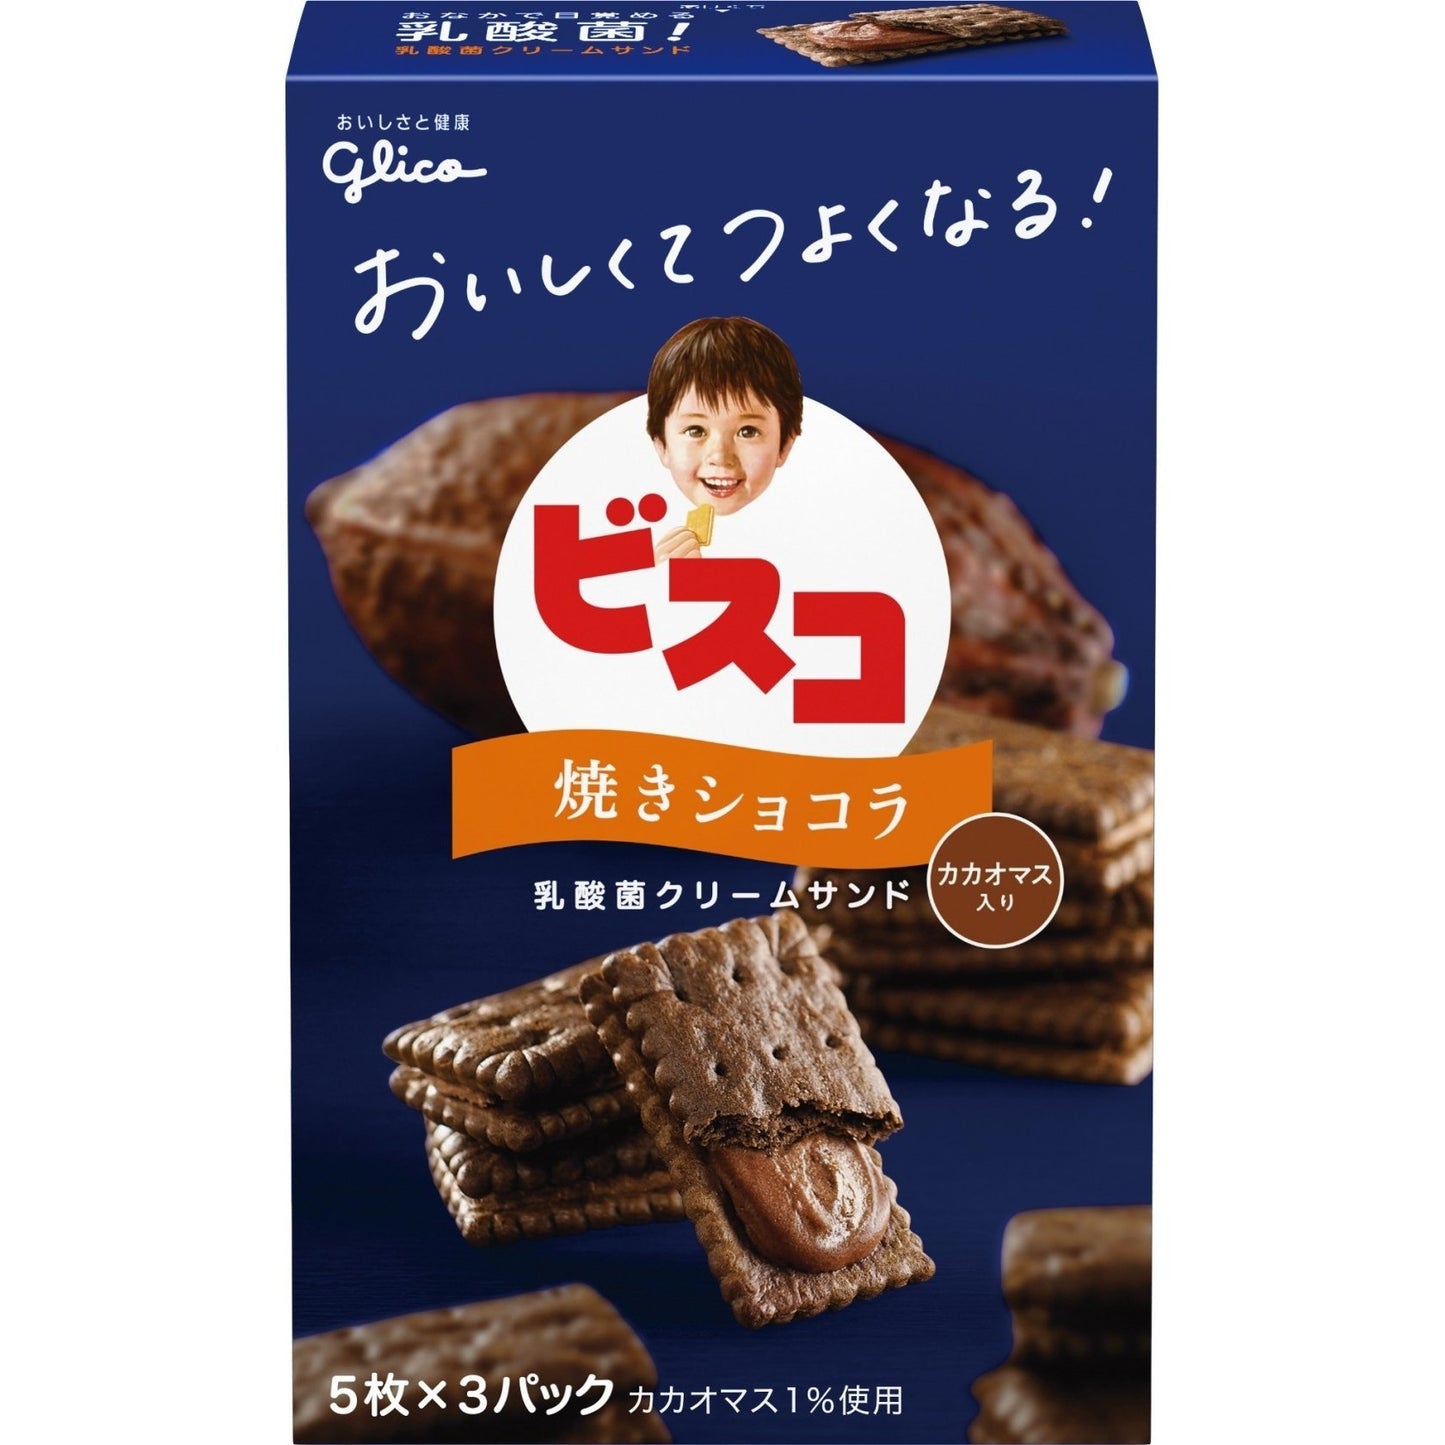 [Glico][Bisco - Baked Chocolate]